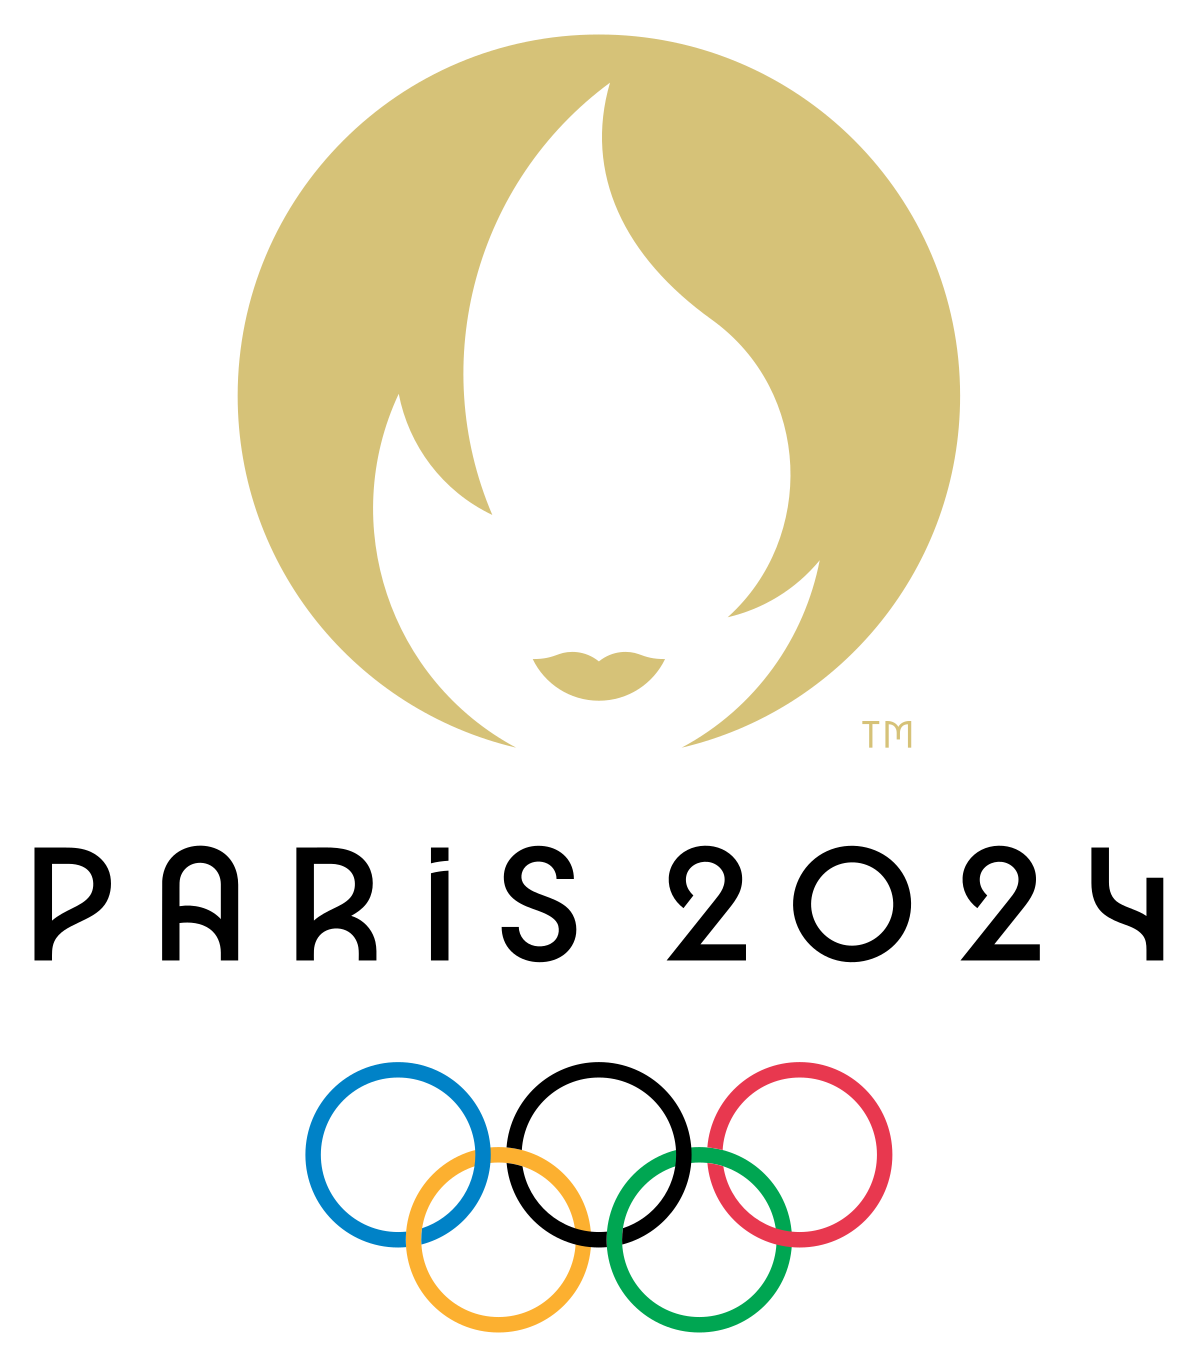 Event Schedule – Paris 2024 Olympic Games – My Sports Analysis